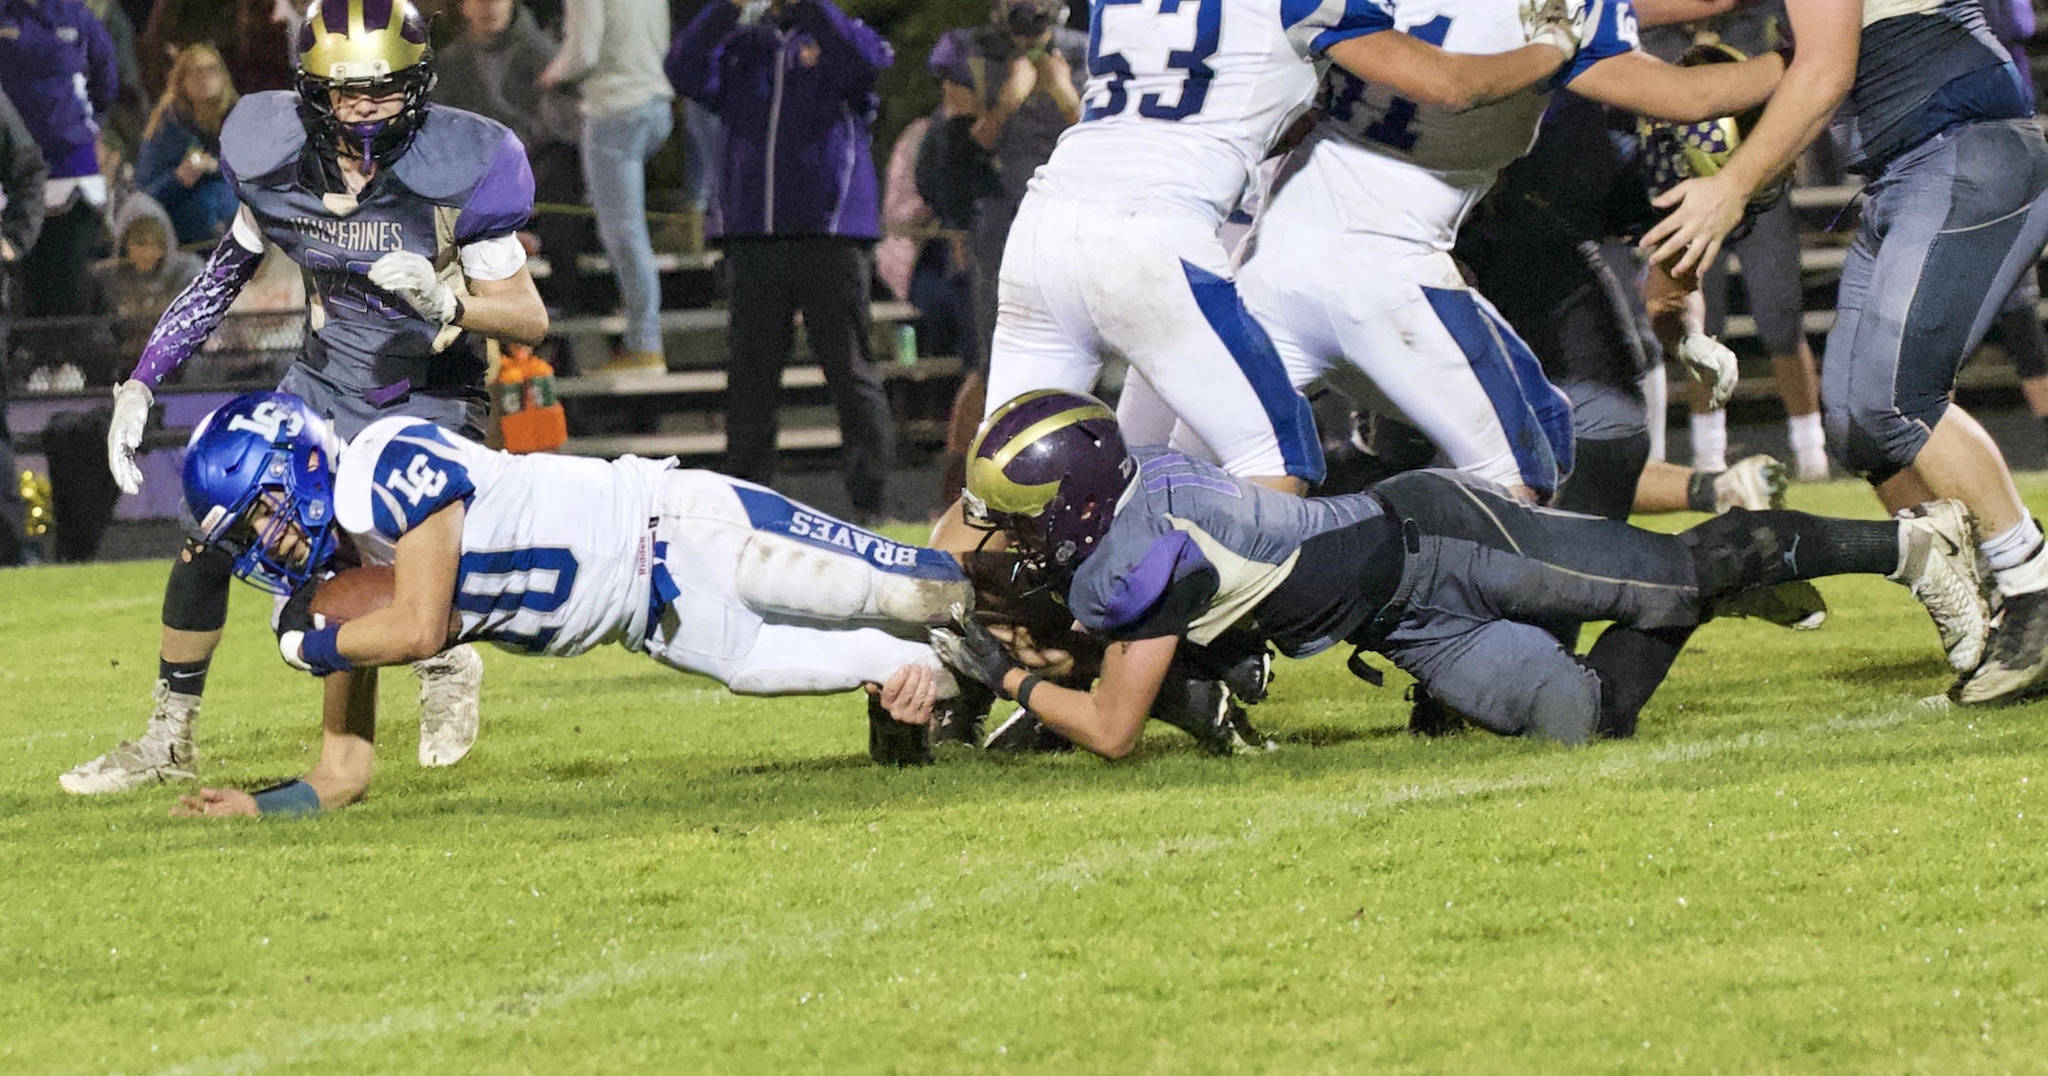 Jaden Jones, No. 10, tackles one of the Braves. (John Stimpson/Contributed photo.)